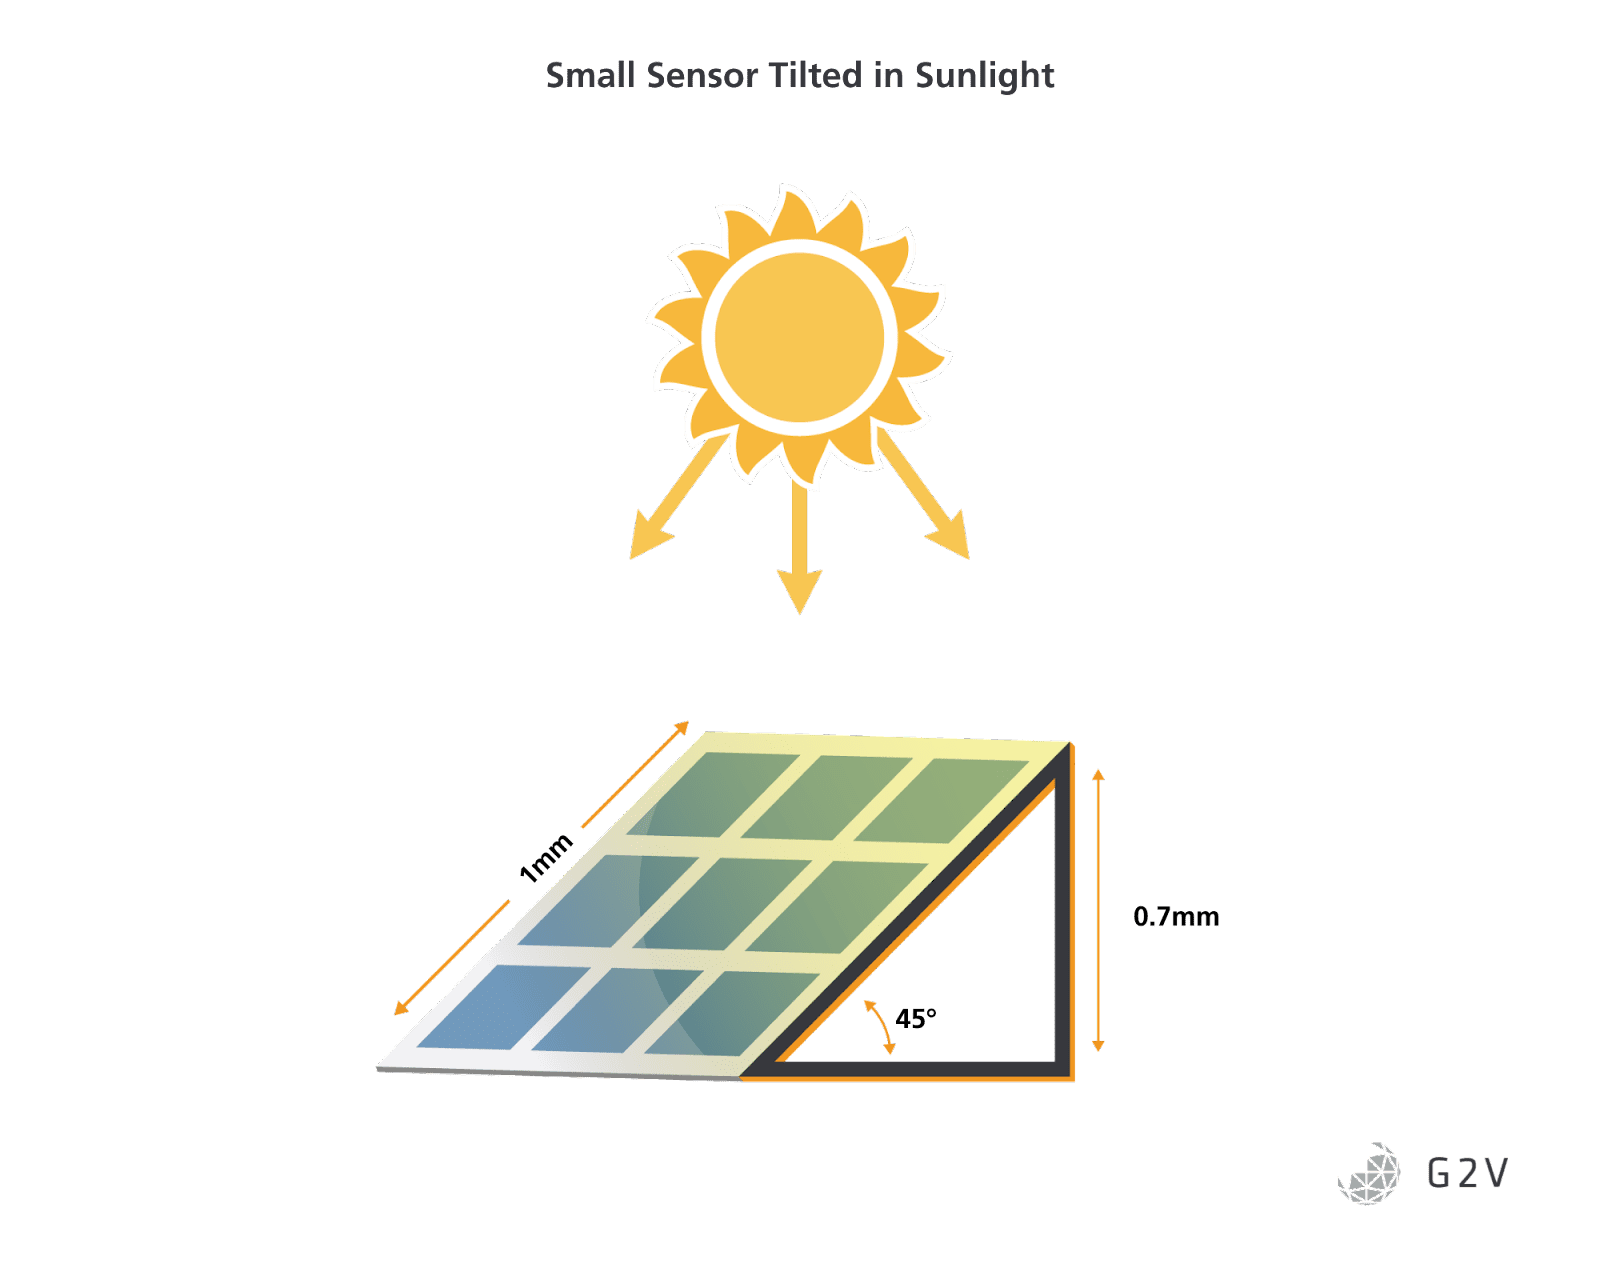 A small sun sensor, when tilted, will have its front edge 0.7 mm closer to the light source compared to its back edge. This difference will probably not result in much difference of irradiance between the two areas, depending on the solar simulator’s change of irradiance with distance.